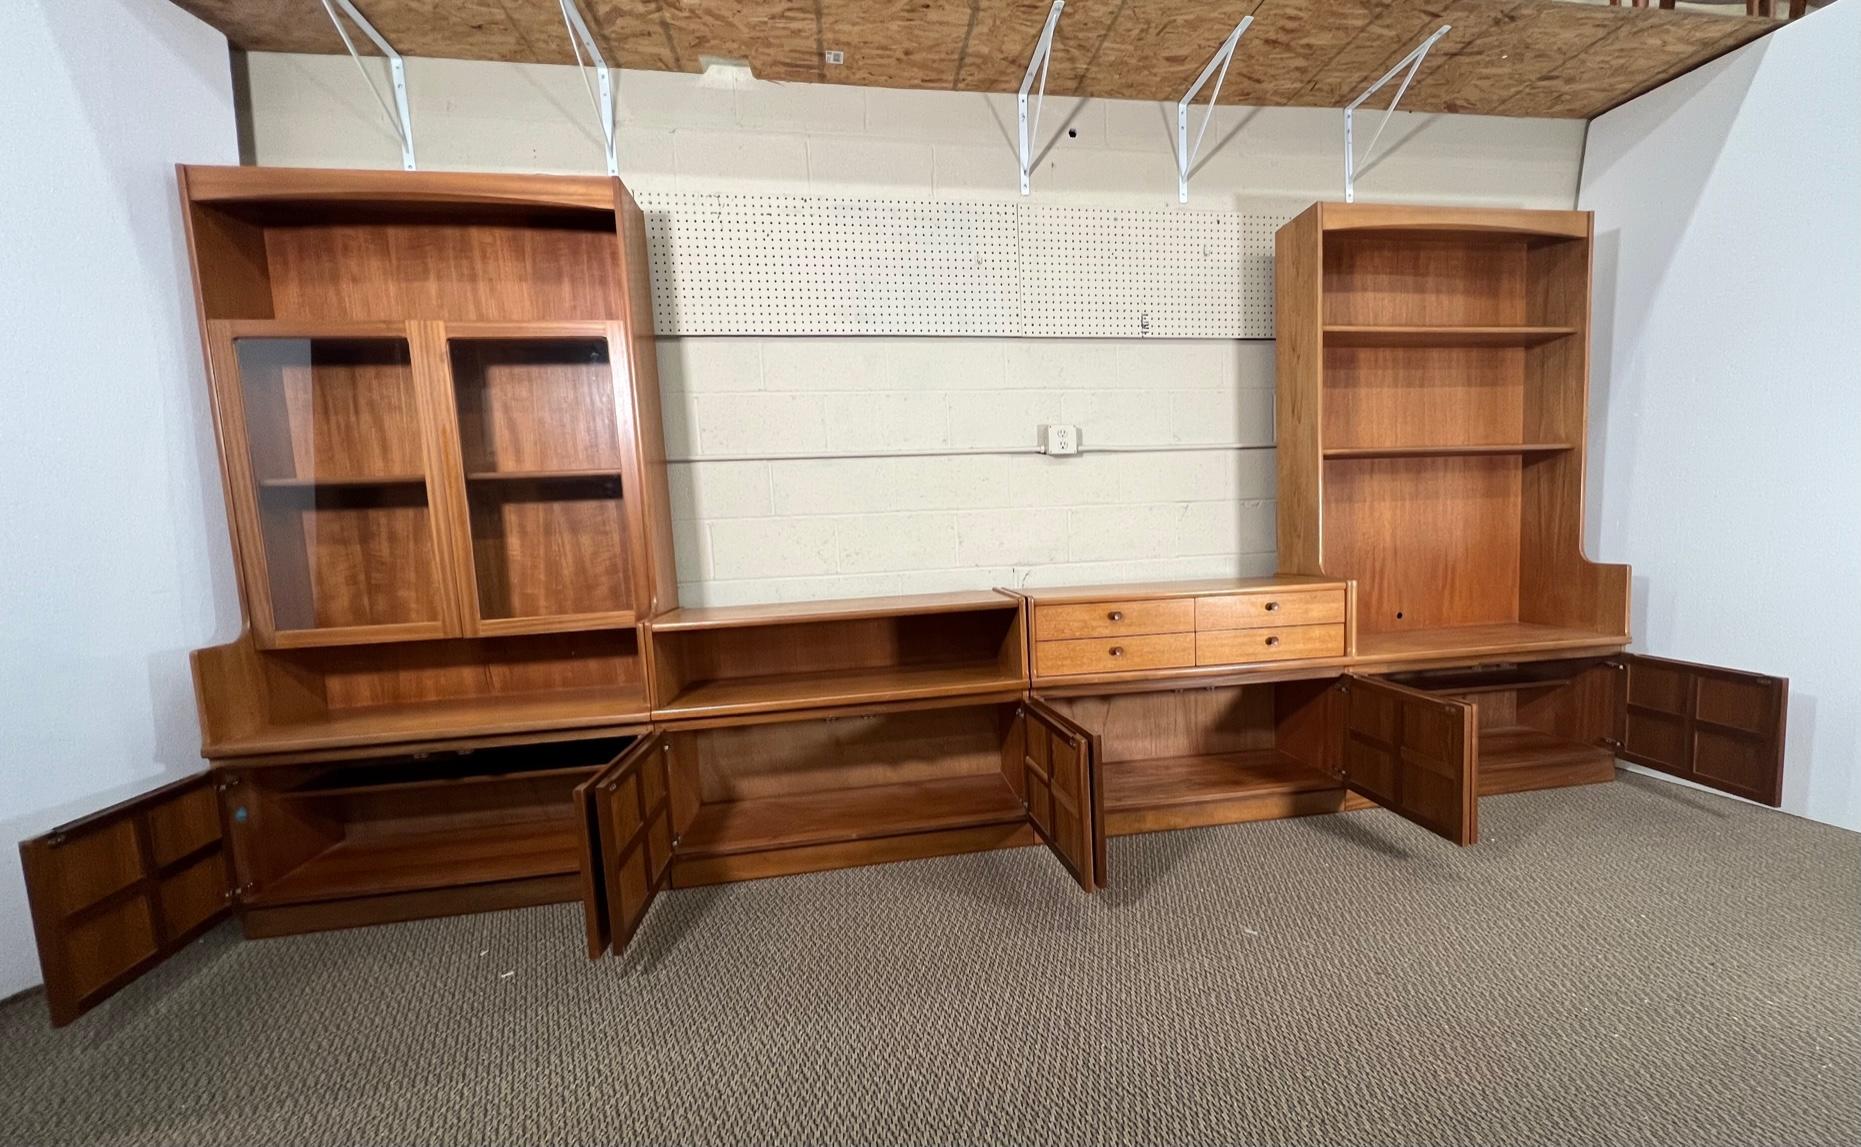 Fantastic teak wall unit made by Nathan Furniture. Made in England.

Can be arranged in multiple ways. Picture shows just one way to set it up. It can also be combined with other Nathan wall units. Original labels are attached.

Very good vintage